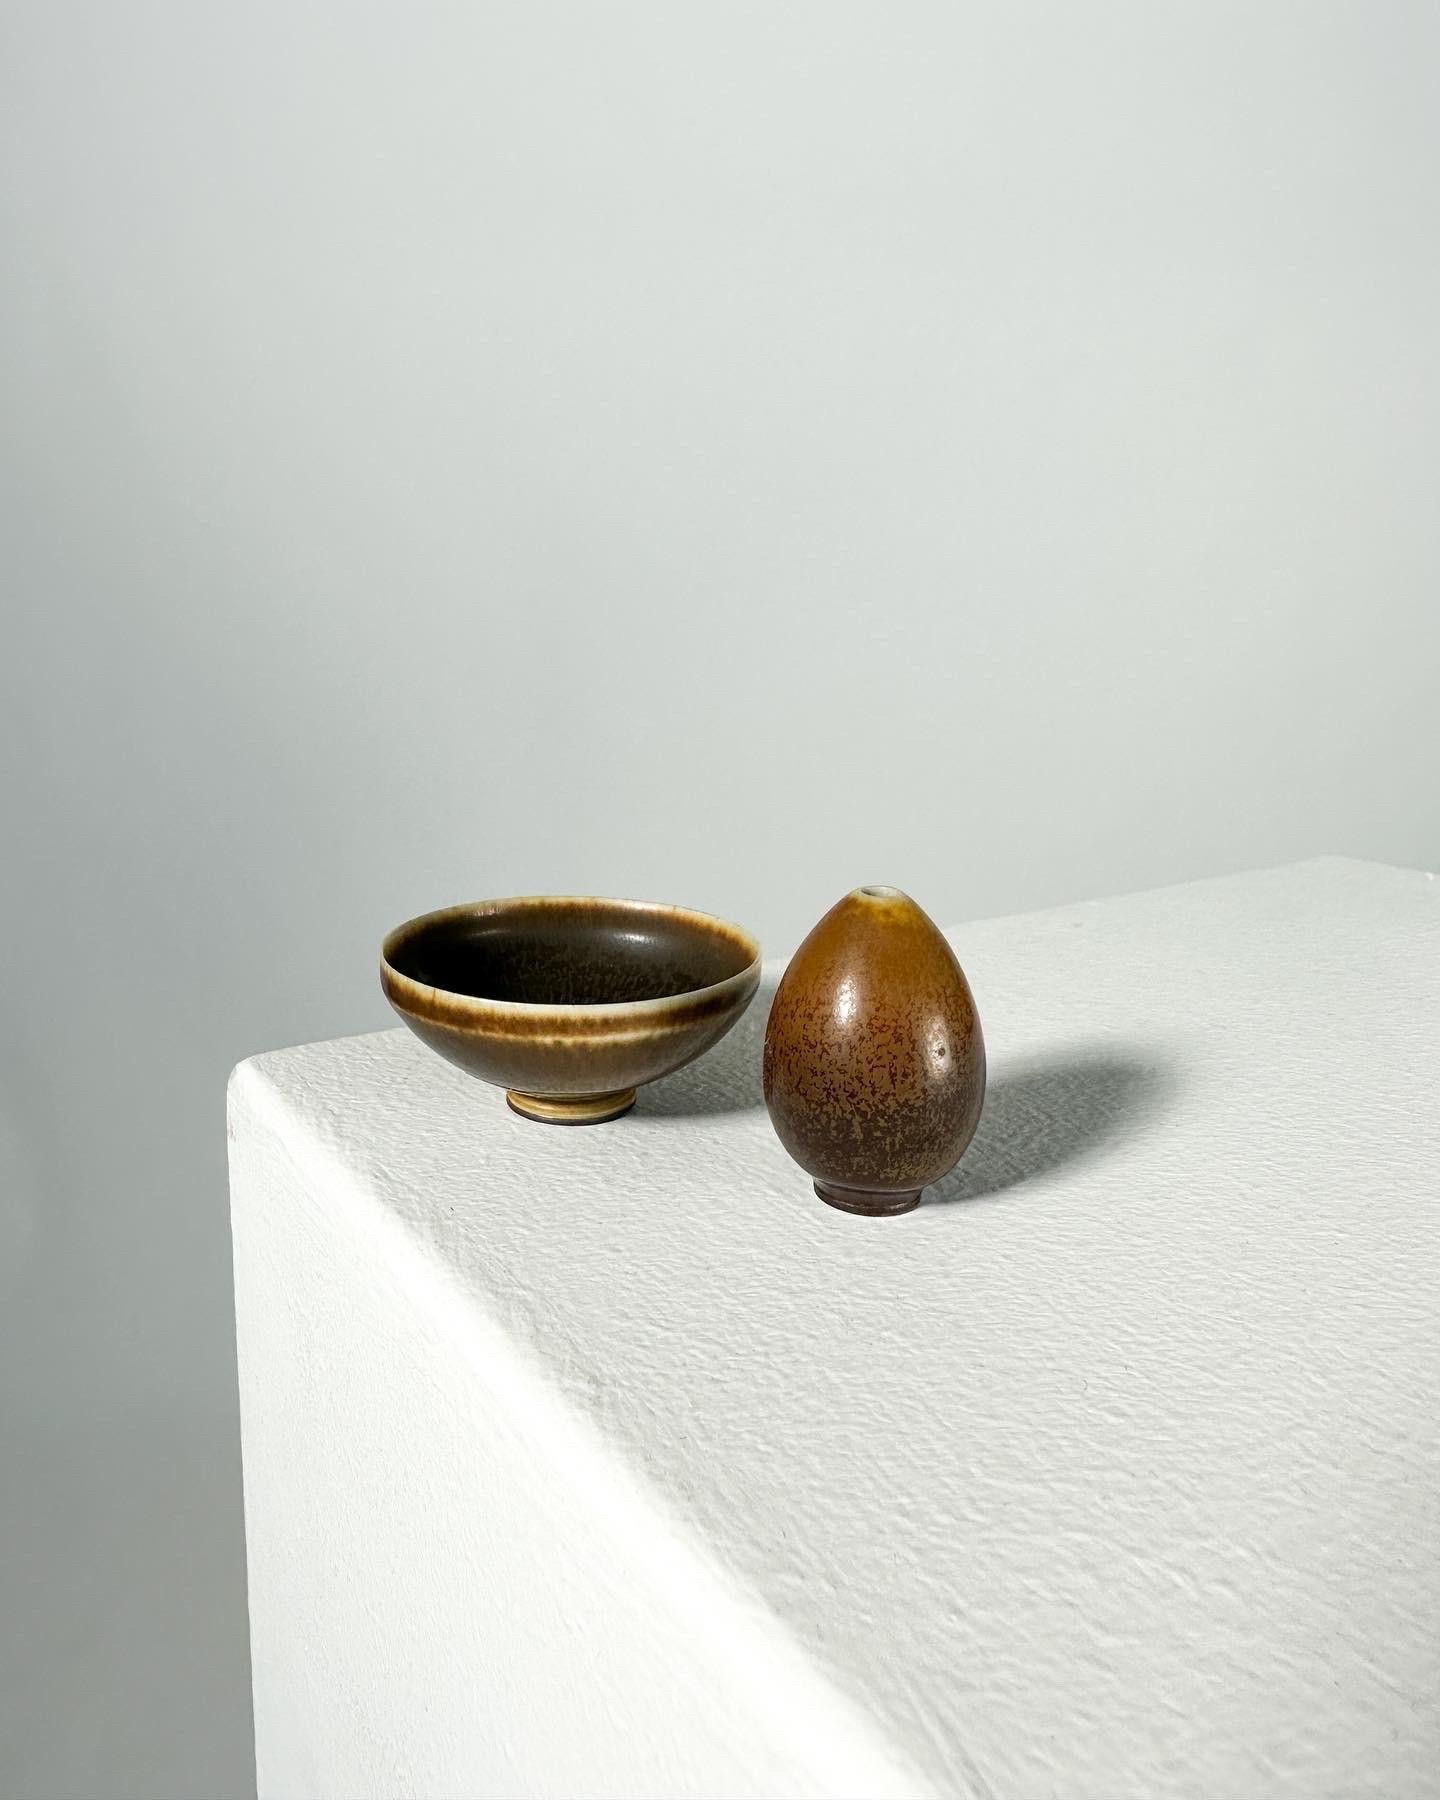 Berndt Friberg miniature egg vase and brown bowl, hand-crafted at his studio at Gustavsberg factory in 1957.

Both in brown hare‘s fur glaze, signed with the letter „Ä“ which stands for 1957.

Diameter of bowl: 5.5 cm
Height of bowl: 2.3 cm
Height